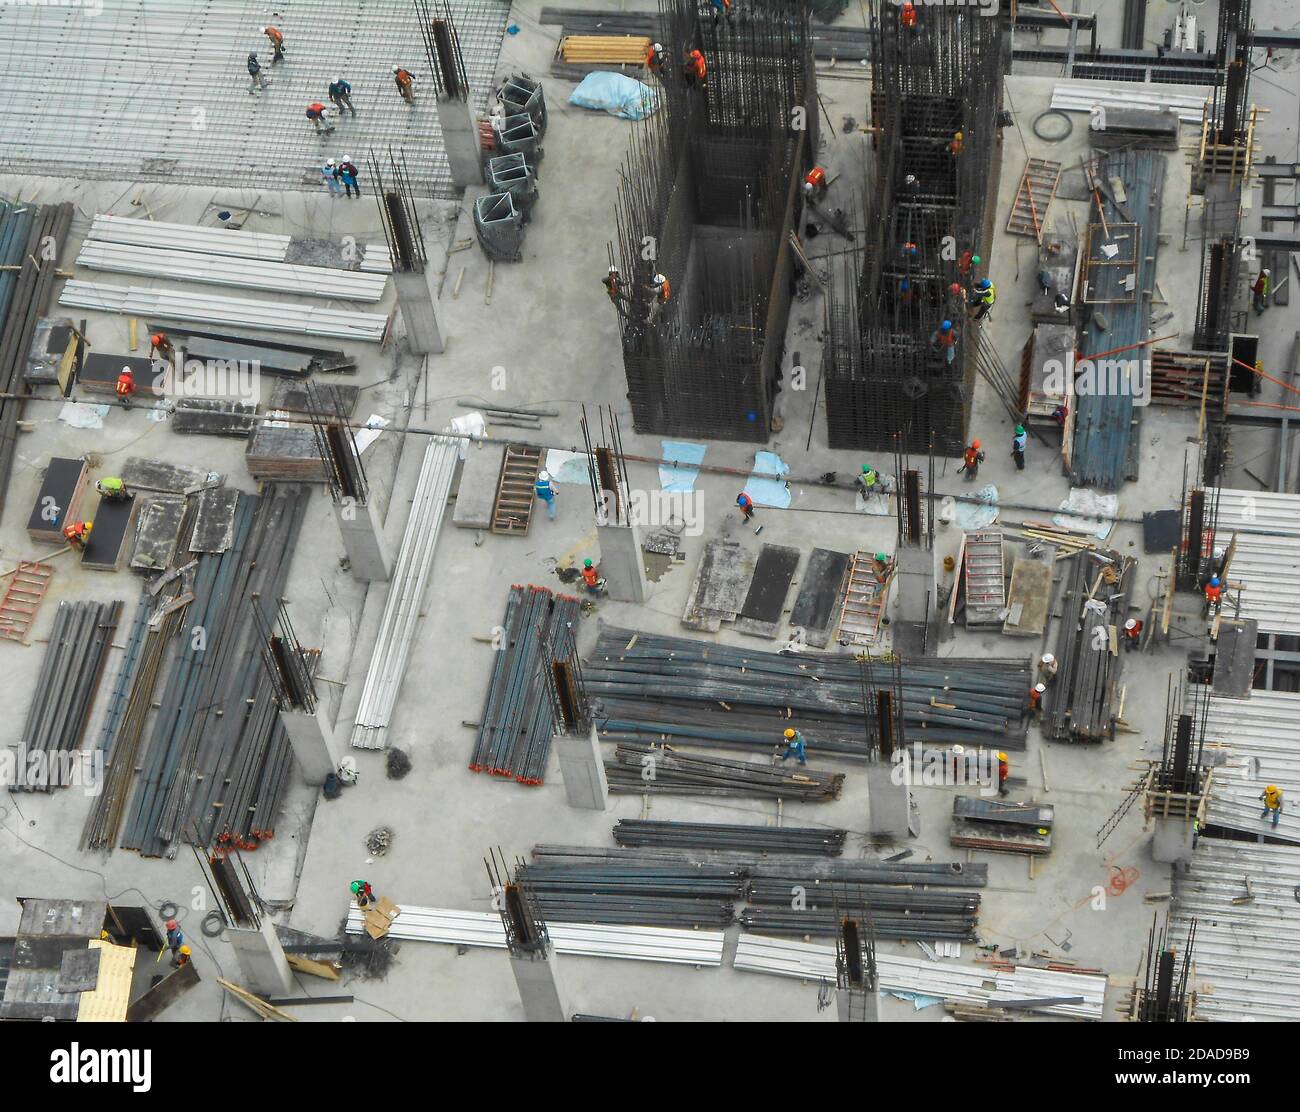 Building construction site with workers viewed from above Stock Photo